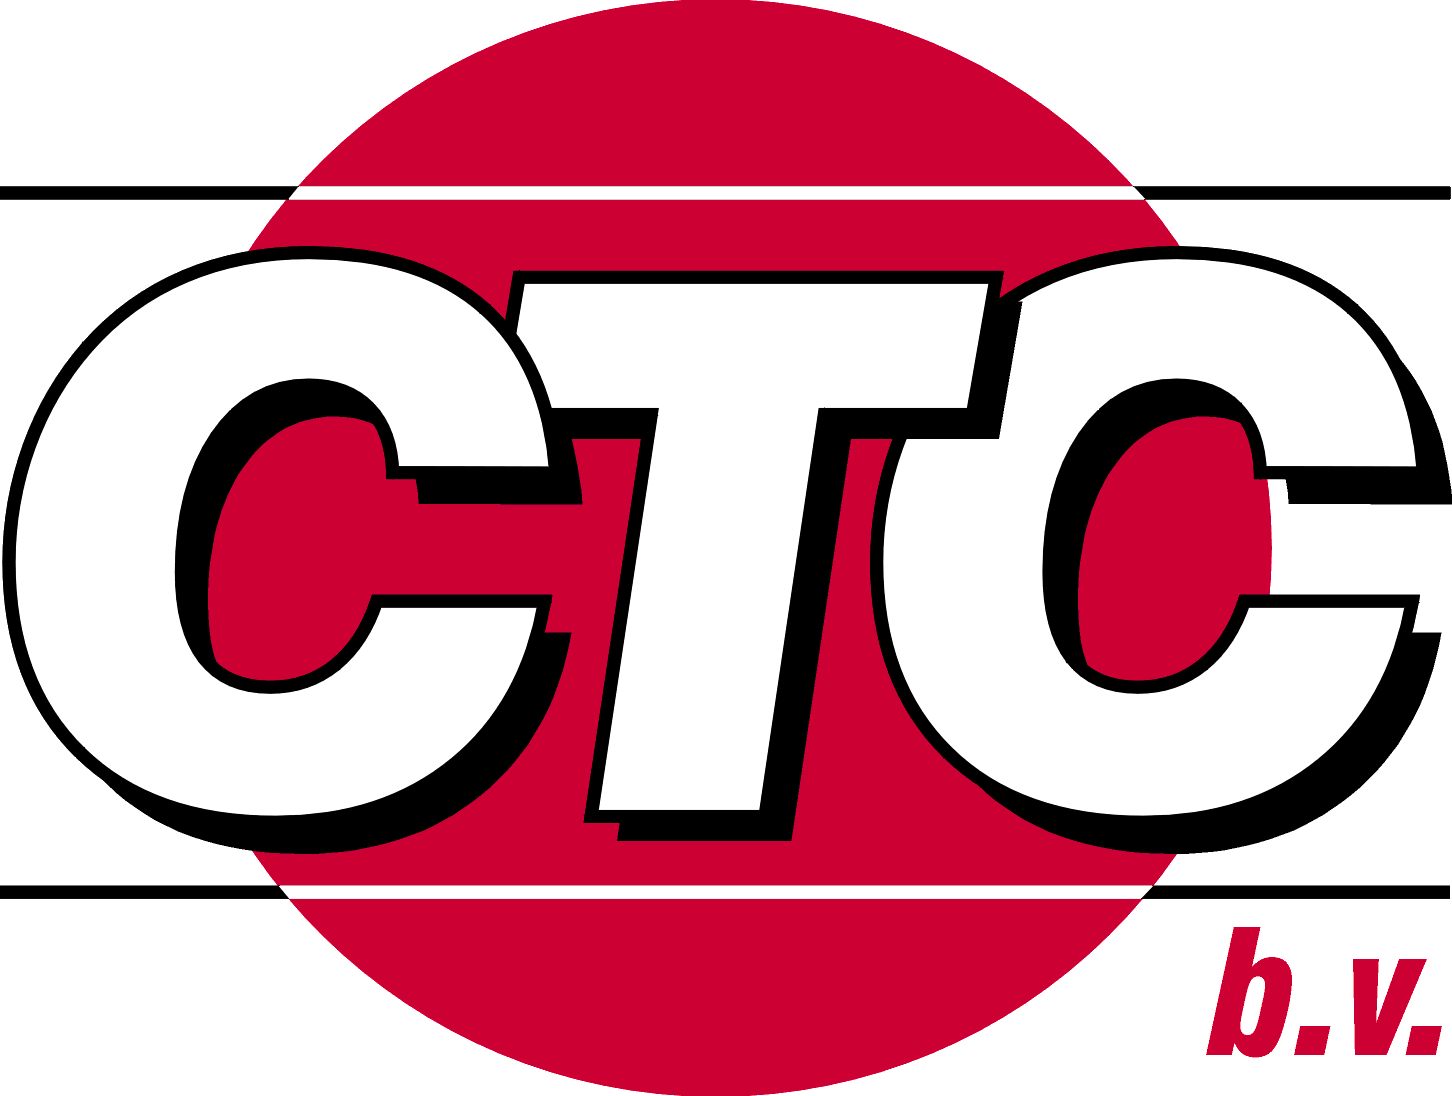 CTC b.v. Cleaning Technology and Consultancy Rotterdam